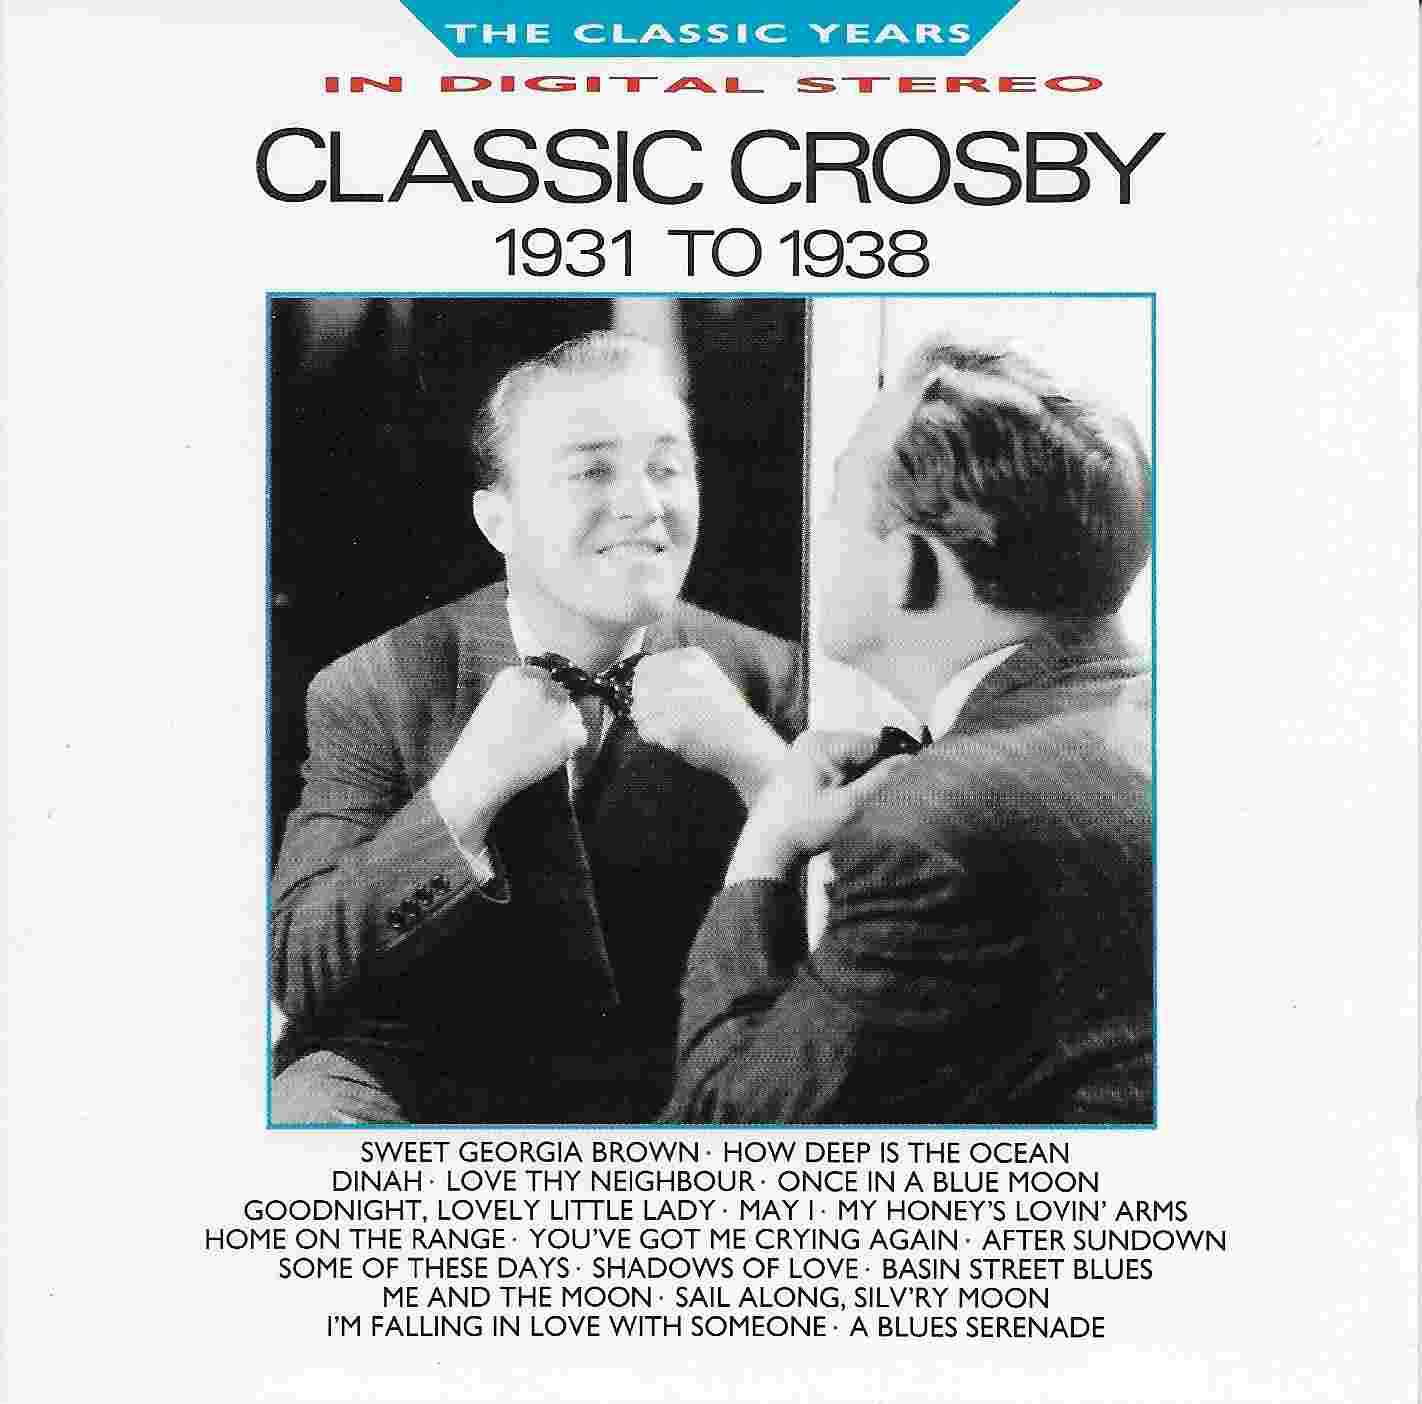 Picture of BBCCD766 Classic years - Classic Crosby 1931 - 1938 by artist Bing Crosby  from the BBC cds - Records and Tapes library